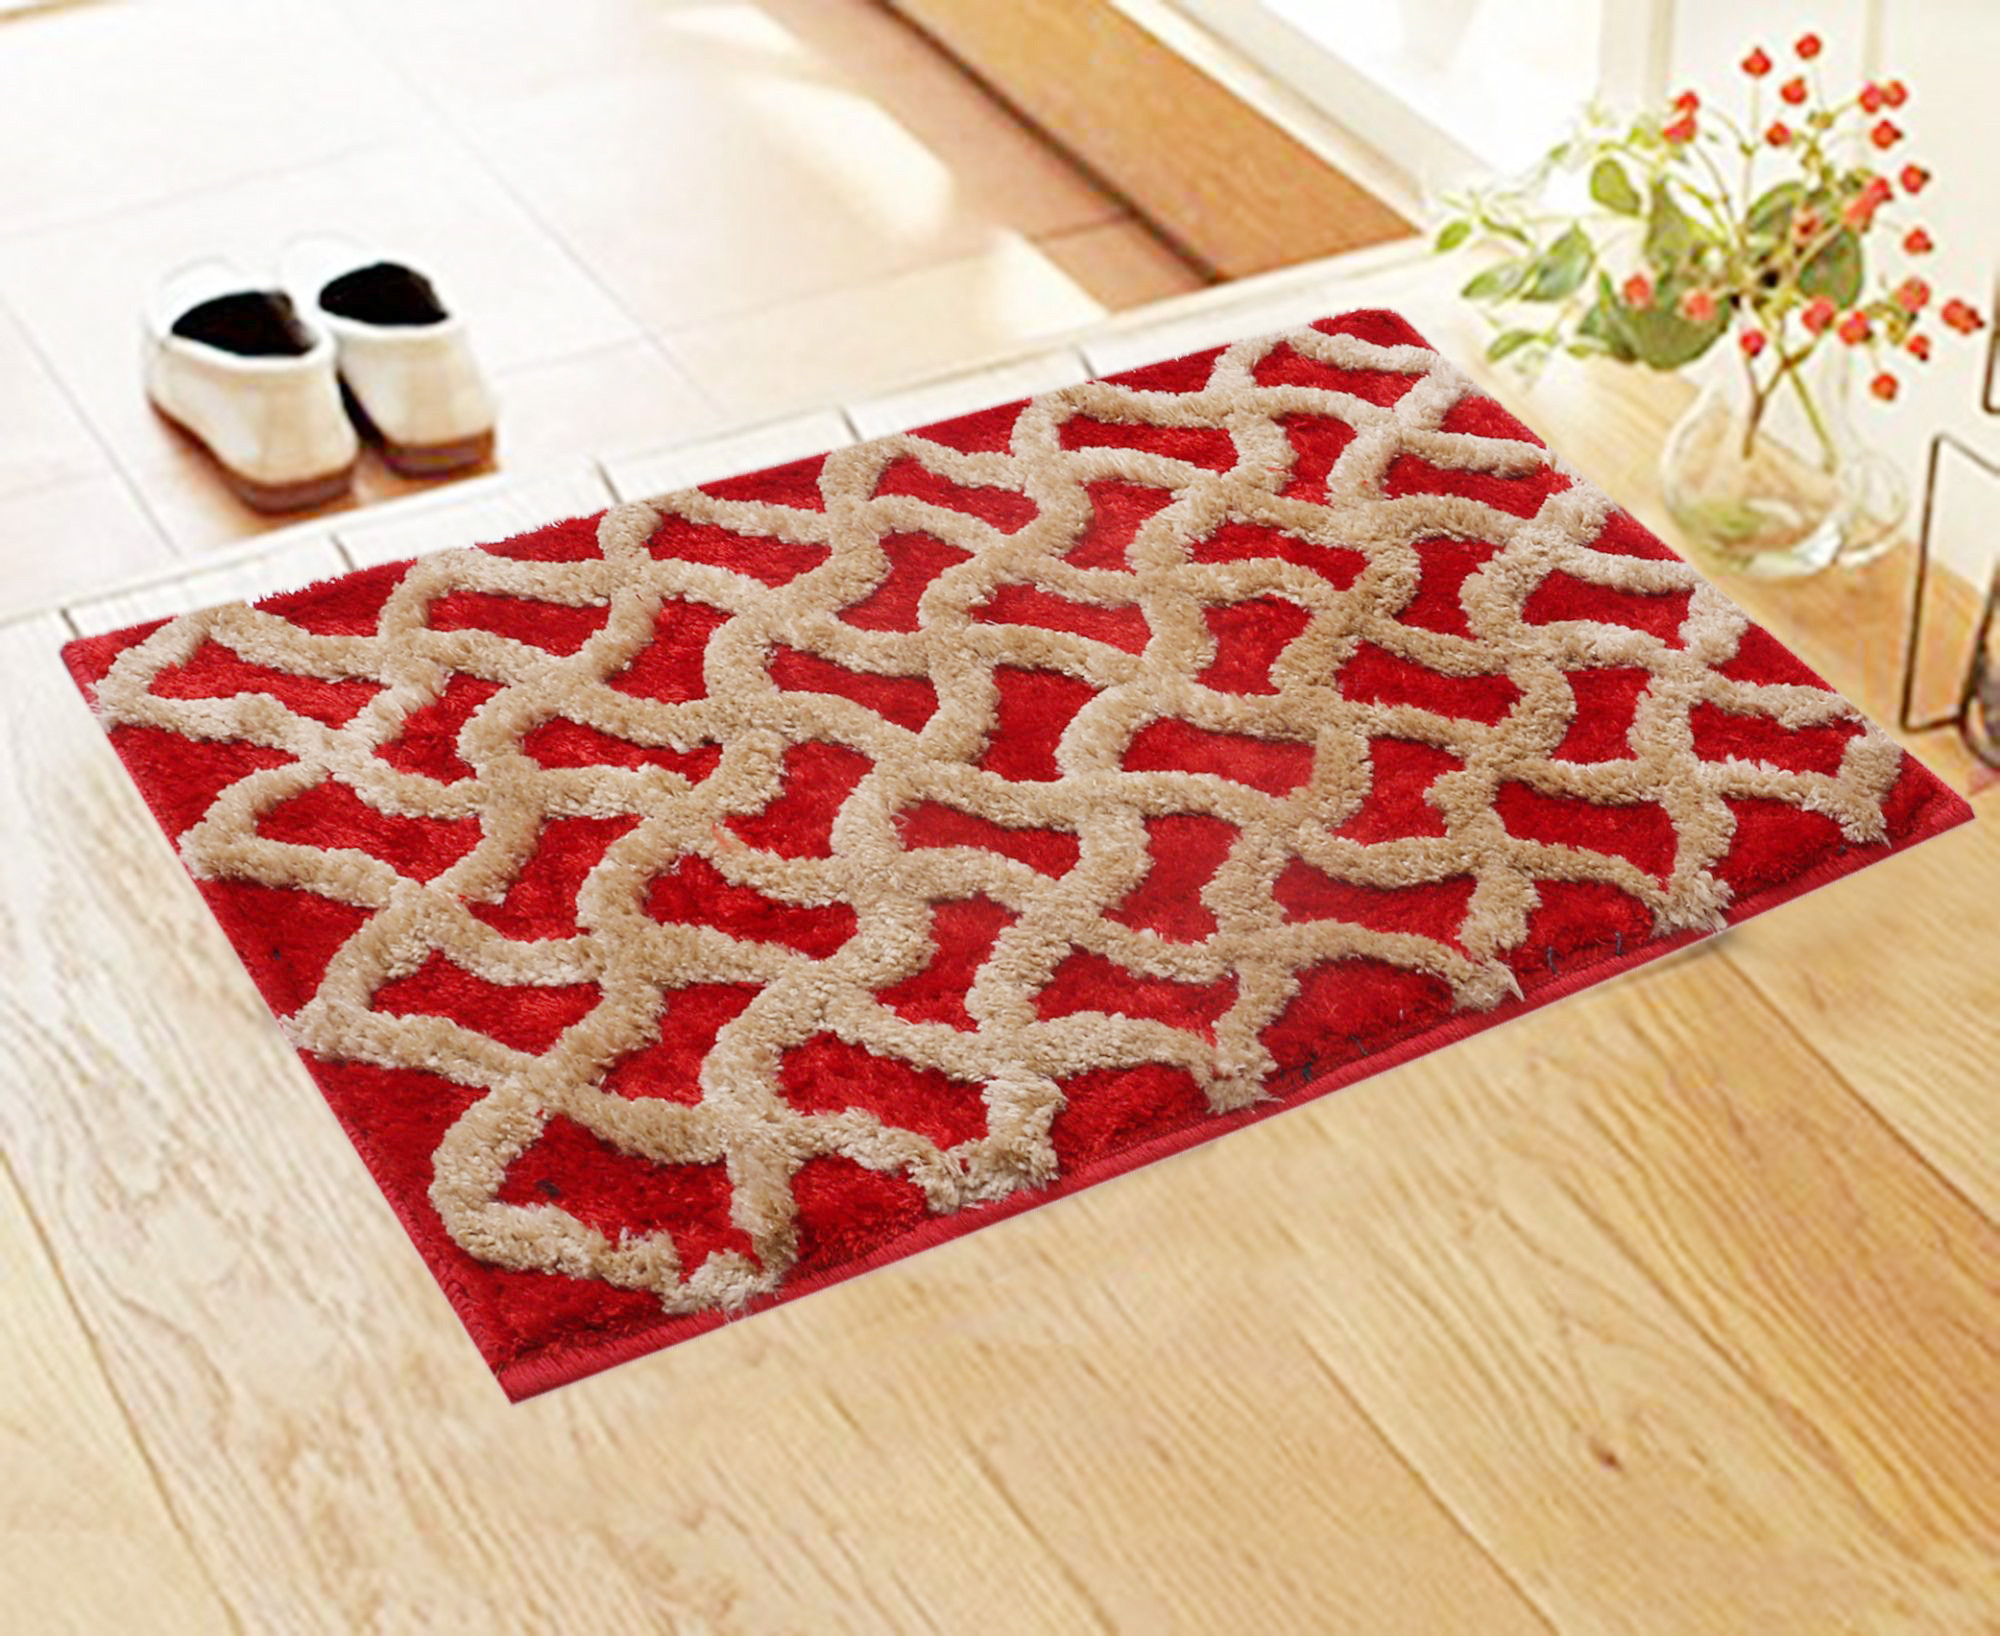 Kuber Industries Soft, lightweigth, Washable, Non Slip Doormat Entrance Rug Dirt Trapper Mat Shoes Scraper for Entry, Patio, Porch (Red)